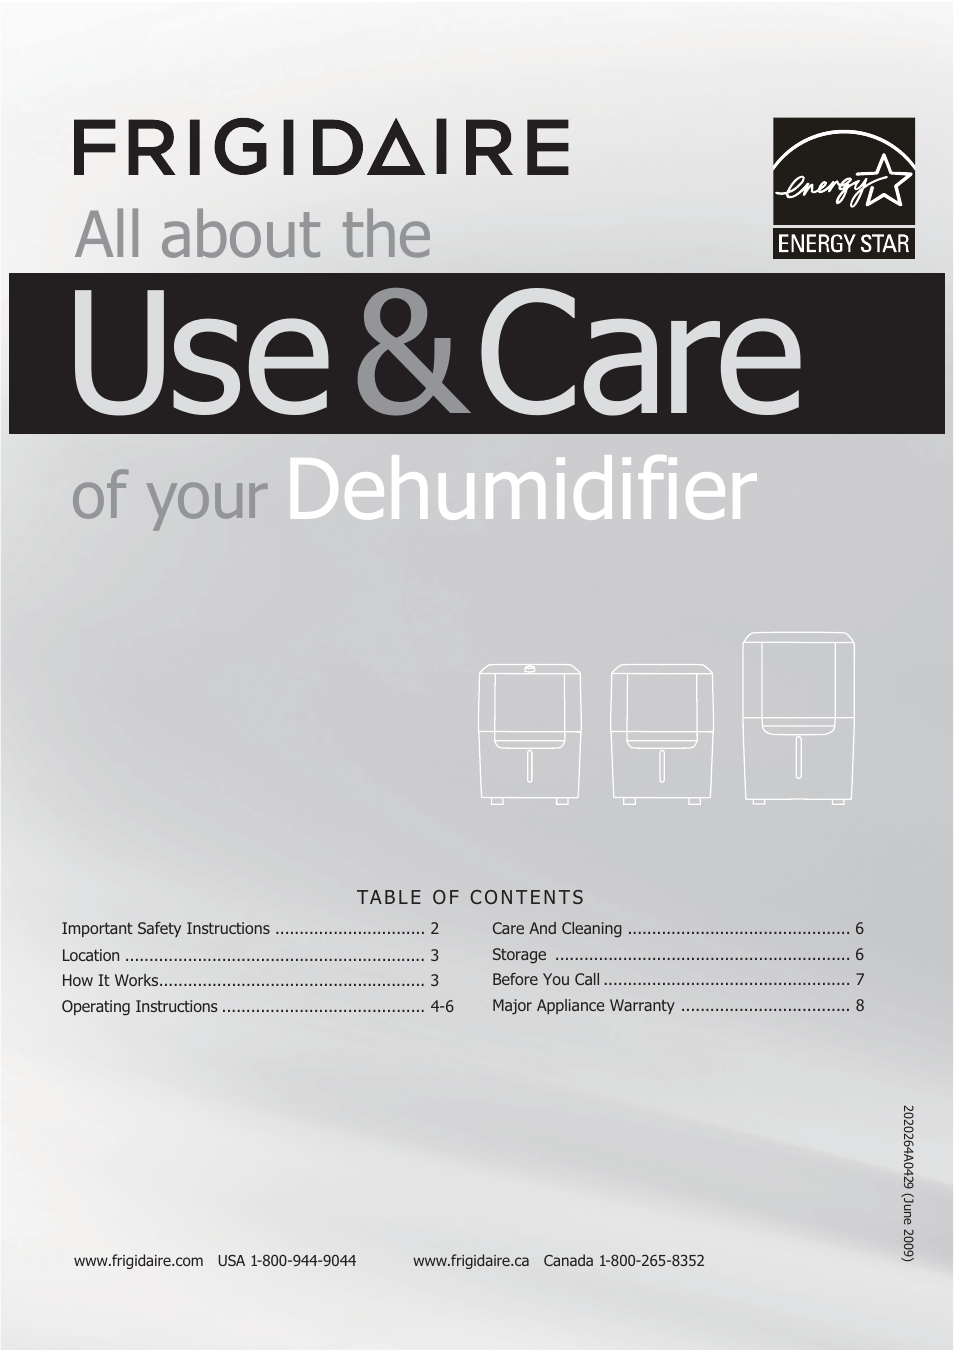 FRIGIDAIRE DEHUMIDIFIER 2020264A0429 User Manual | 8 pages